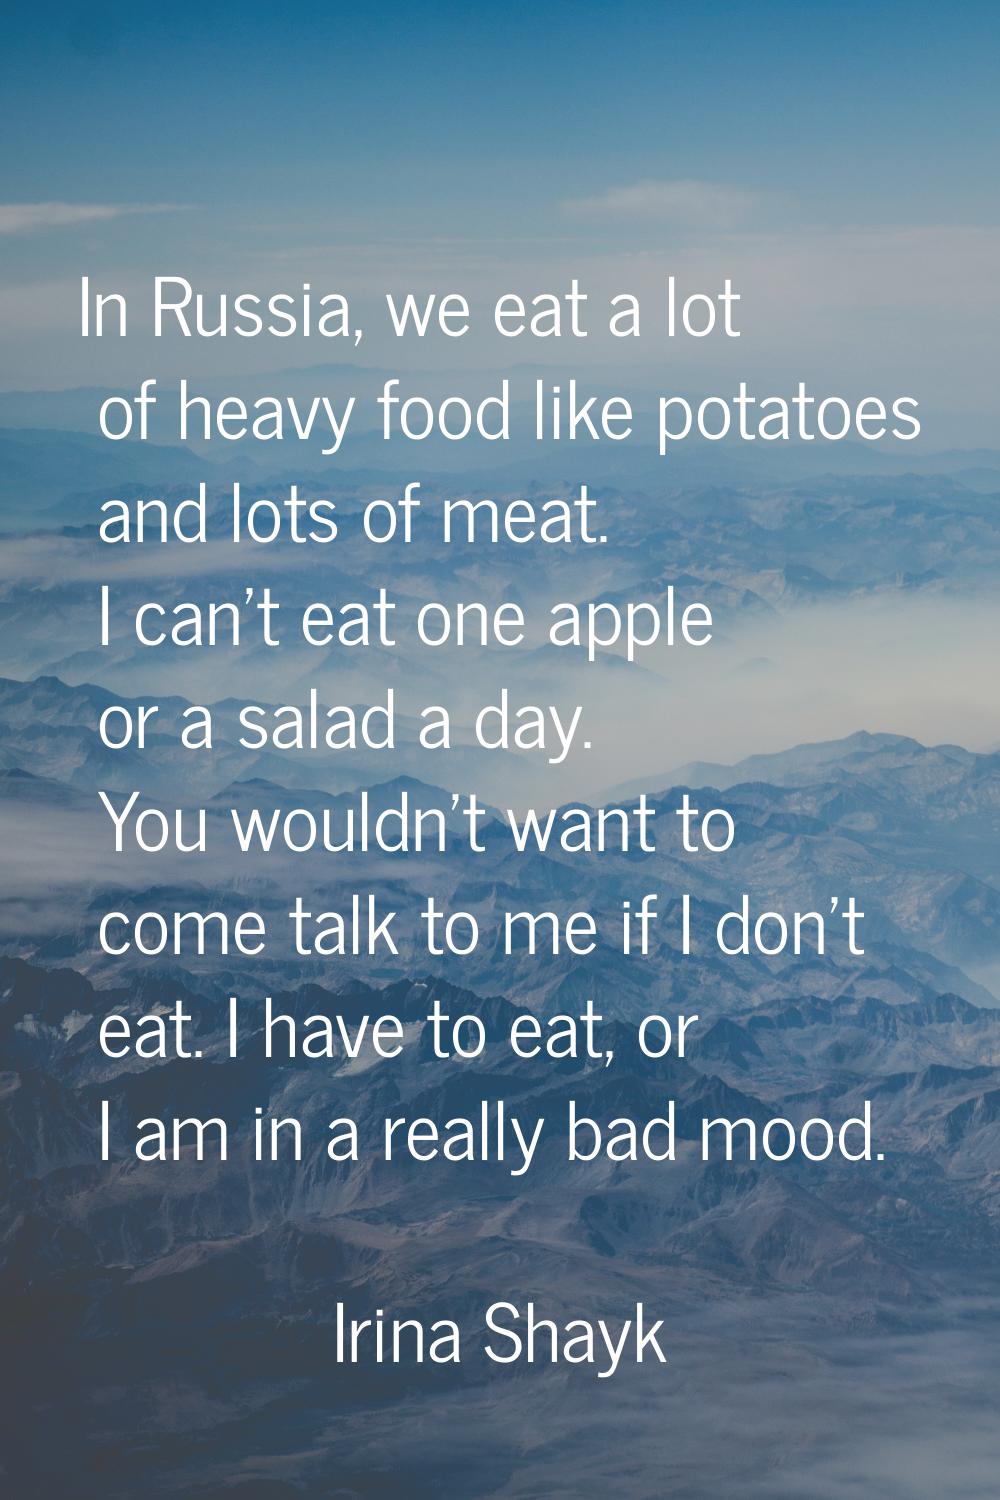 In Russia, we eat a lot of heavy food like potatoes and lots of meat. I can't eat one apple or a sa